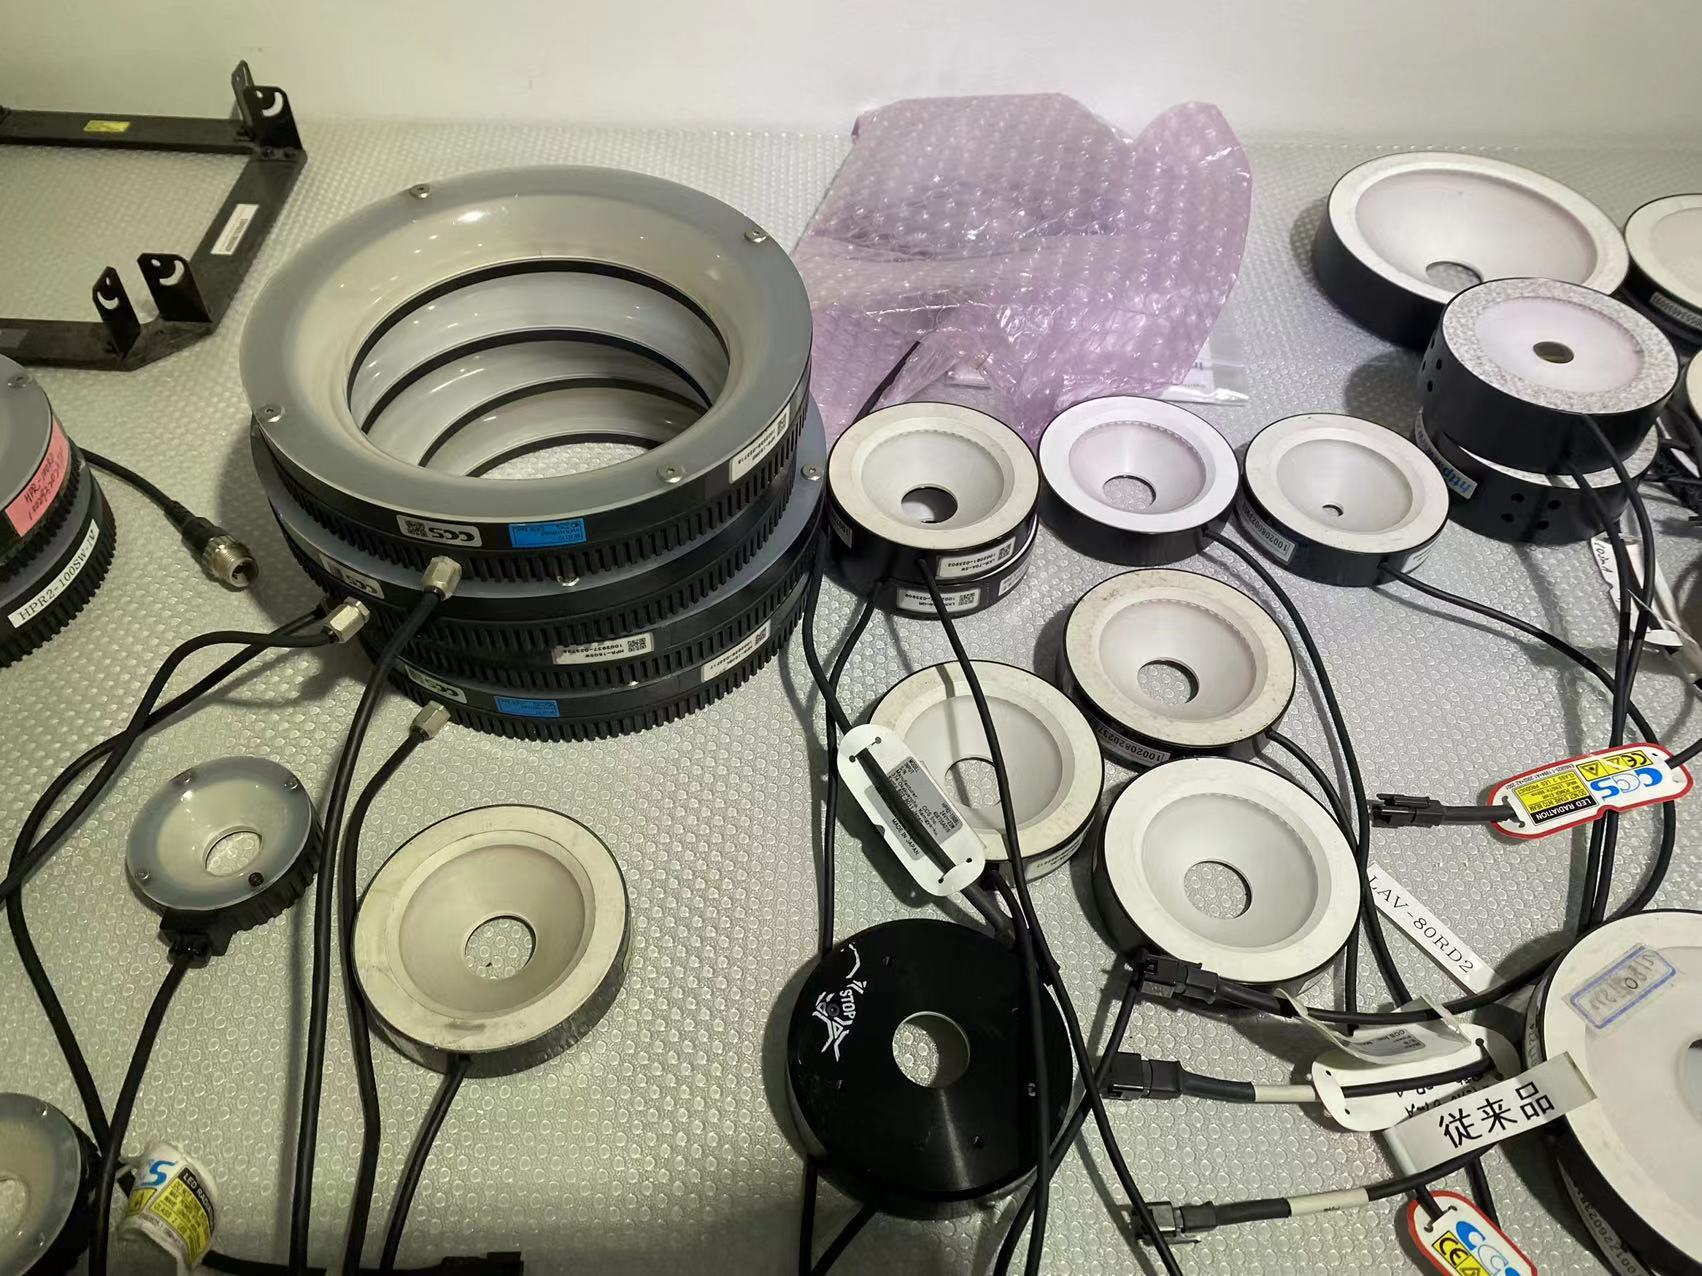 A large number of visual light source products can be produced